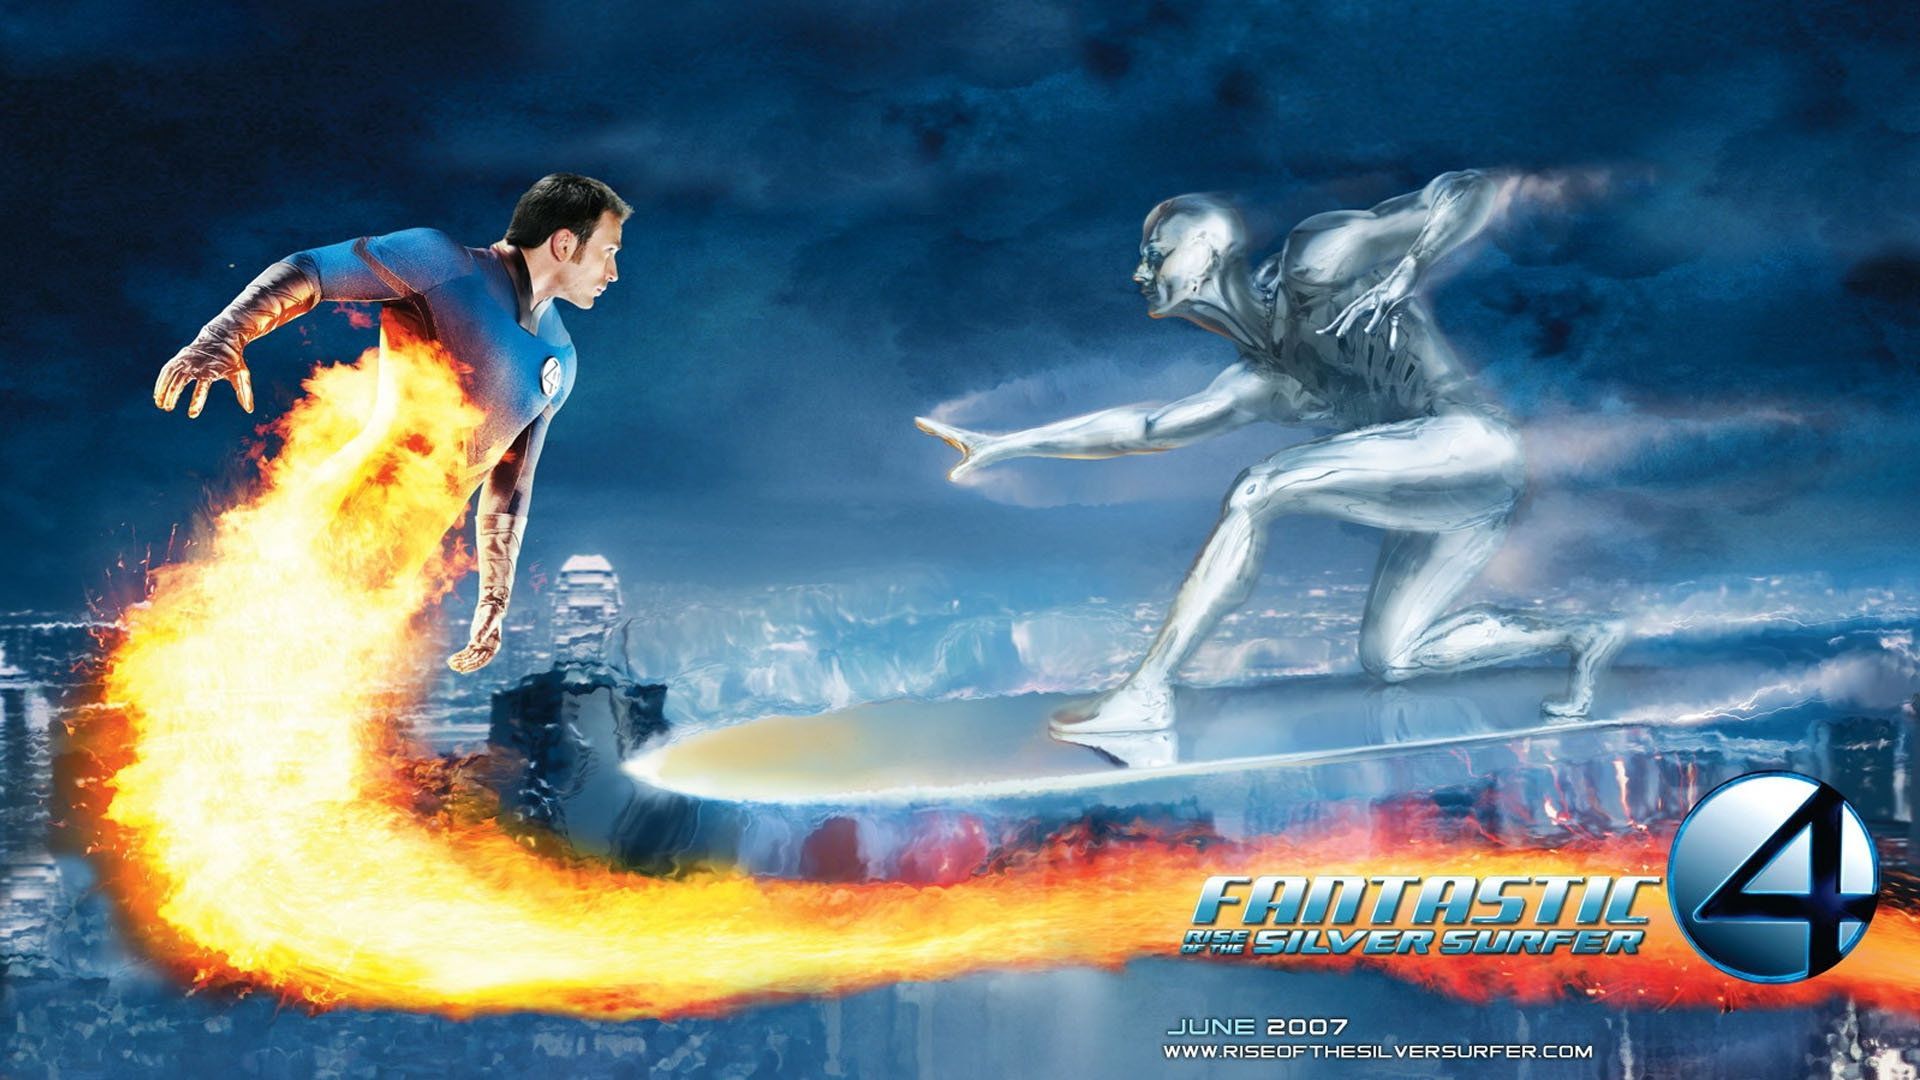 Download Wallpaper 1920x1080 fantastic rise of the silver surfer, chris evans, human torch, johnny. Silver surfer, Silver surfer wallpaper, Silver surfer movie